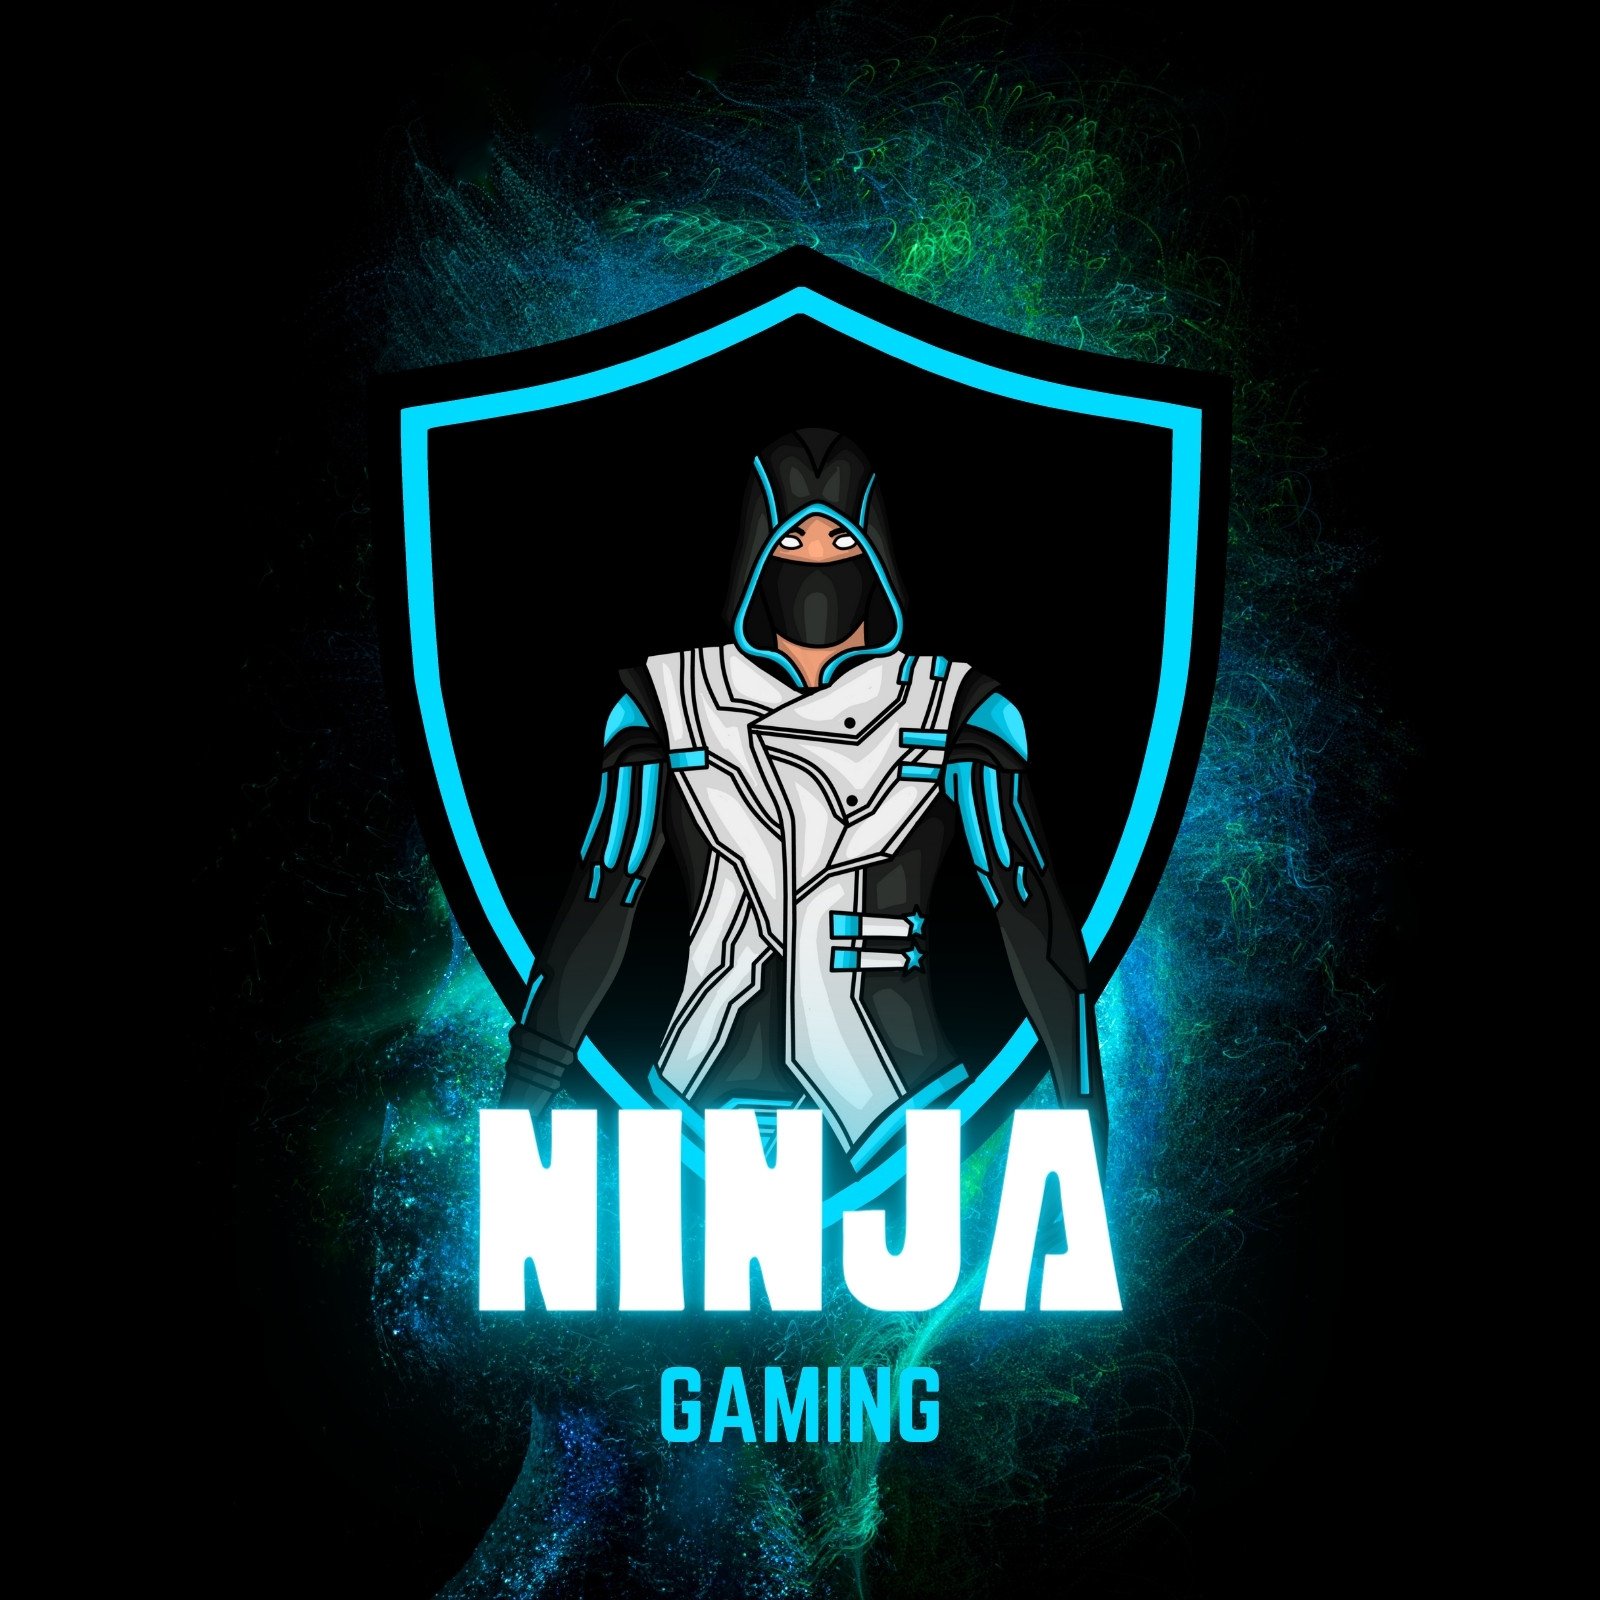 Free and customizable gaming logo templates | Canva